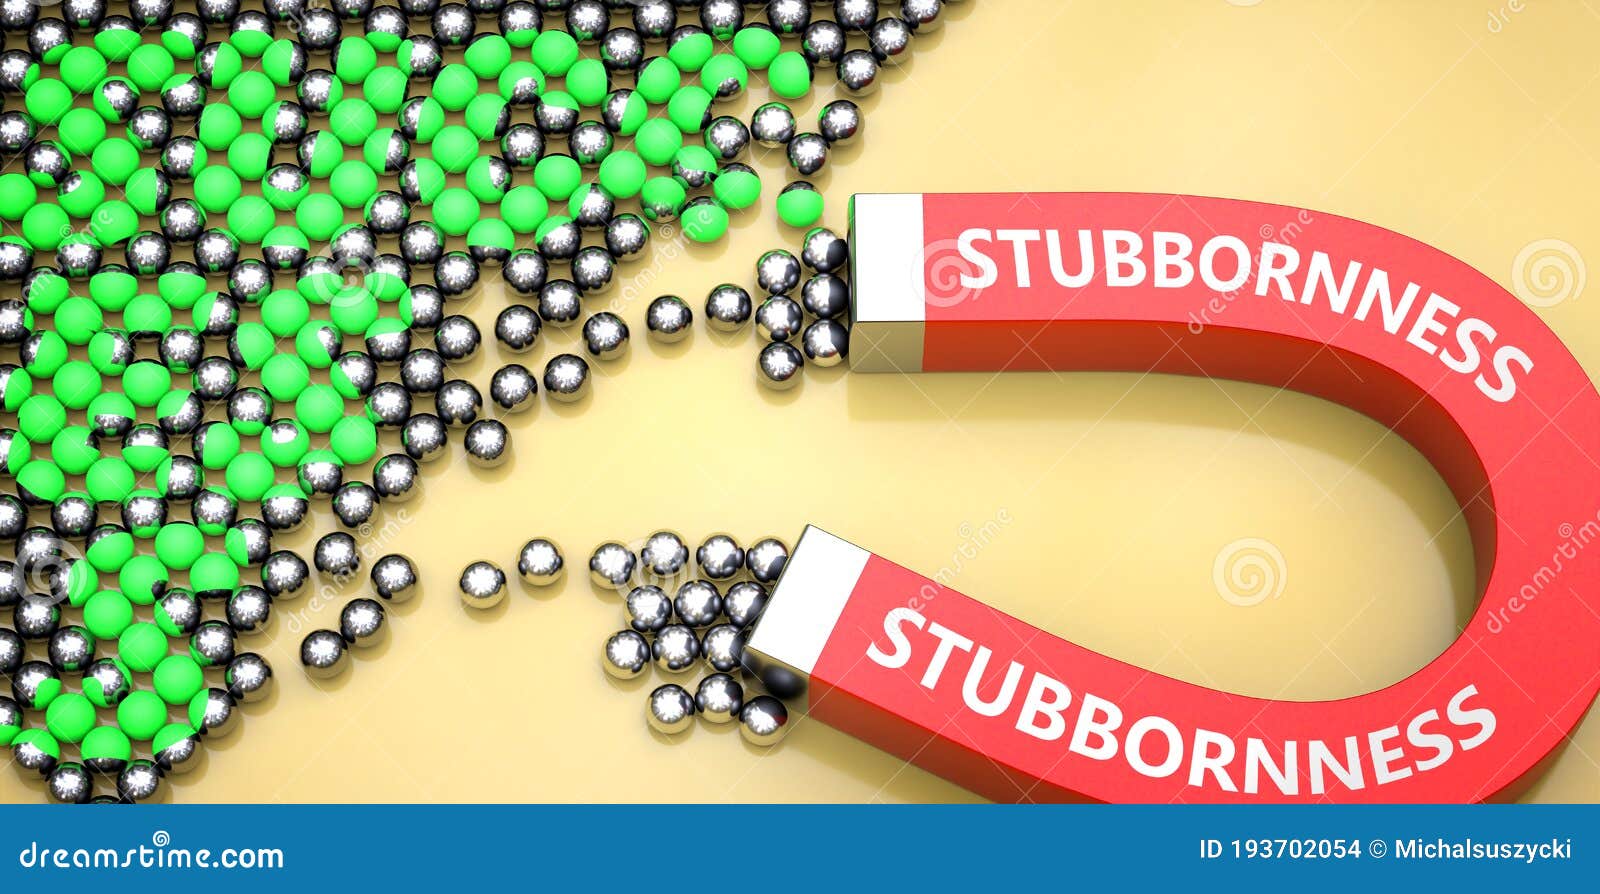 stubbornness attracts success - pictured as word stubbornness on a magnet to ize that stubbornness can cause or contribute